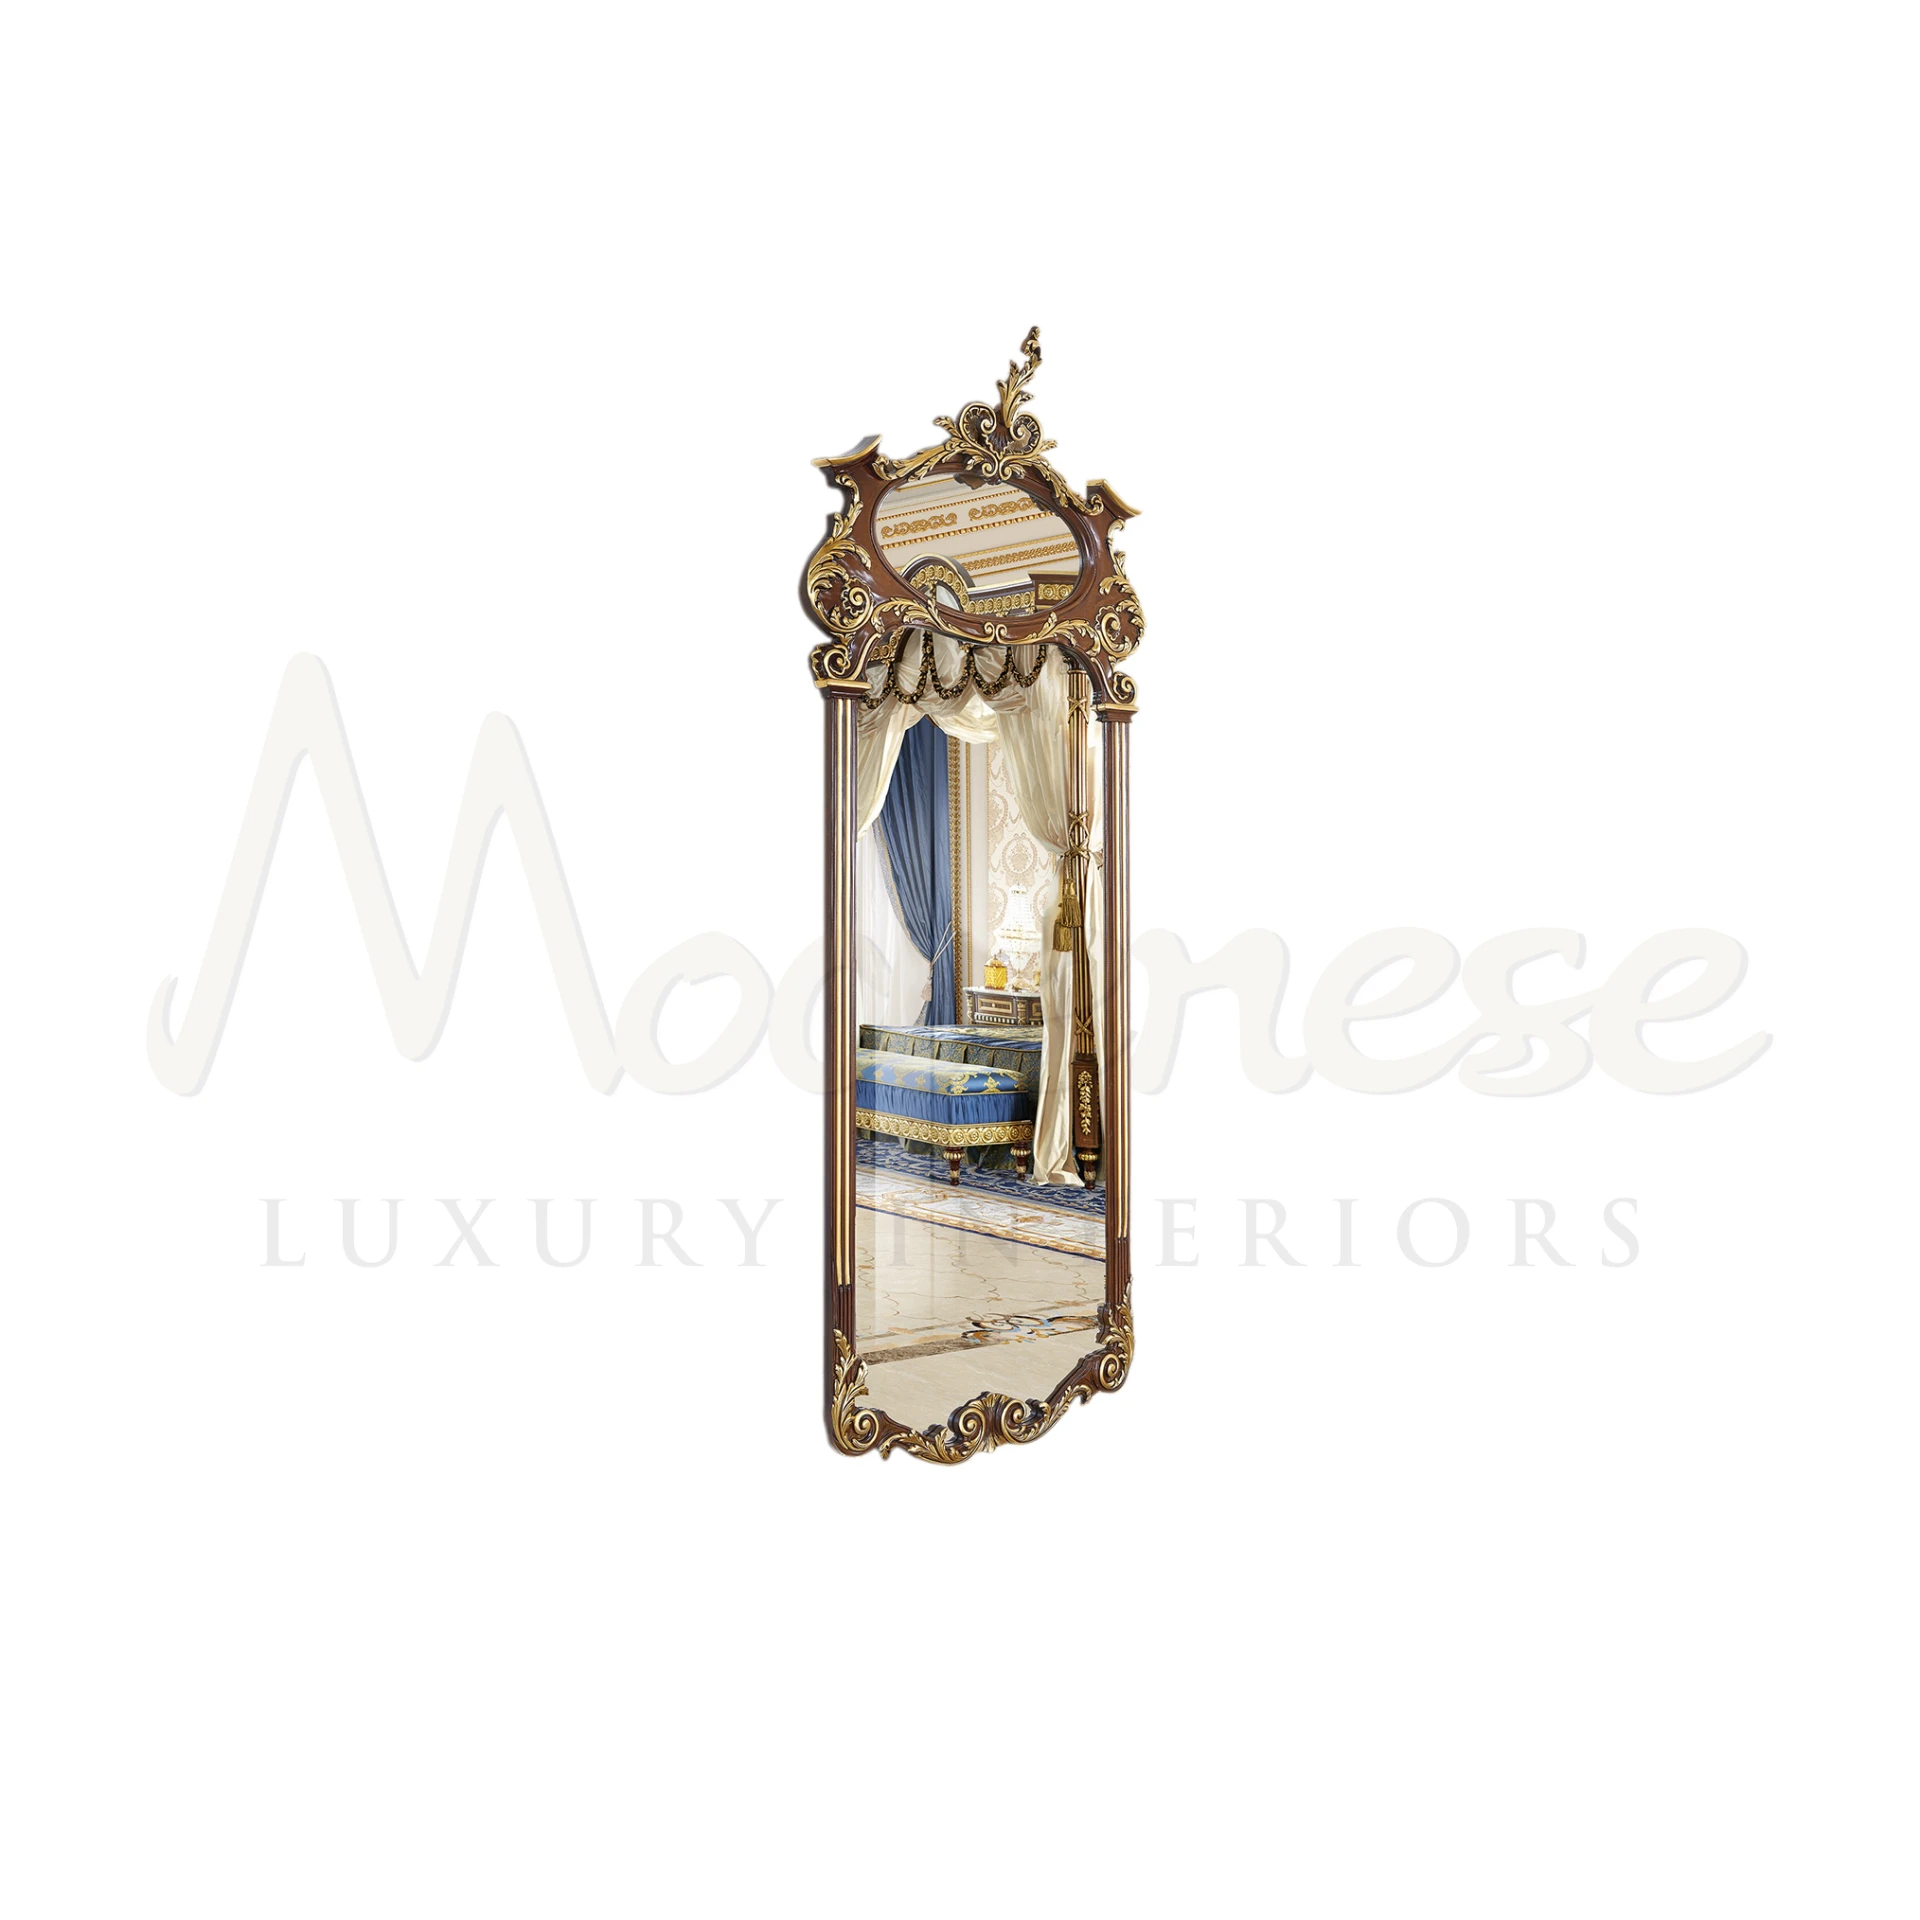 Exquisite Classic Walnut Mirror, perfect for adding regal elegance to French style homes, embodies luxury interior style.